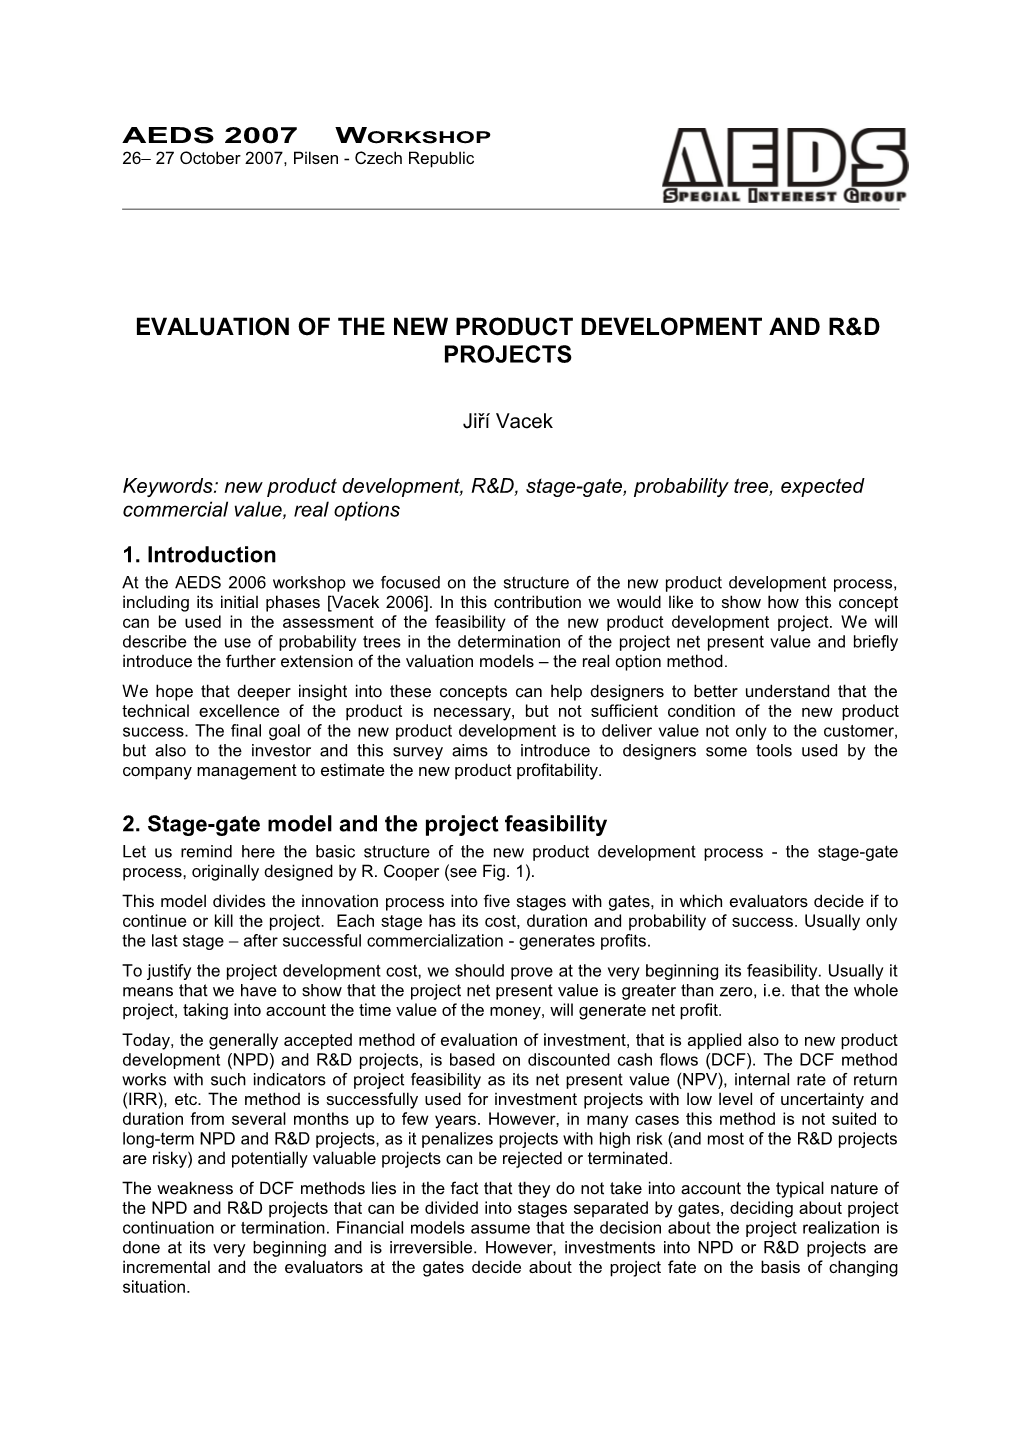 Evaluation of the New Product Development and R&D Projects